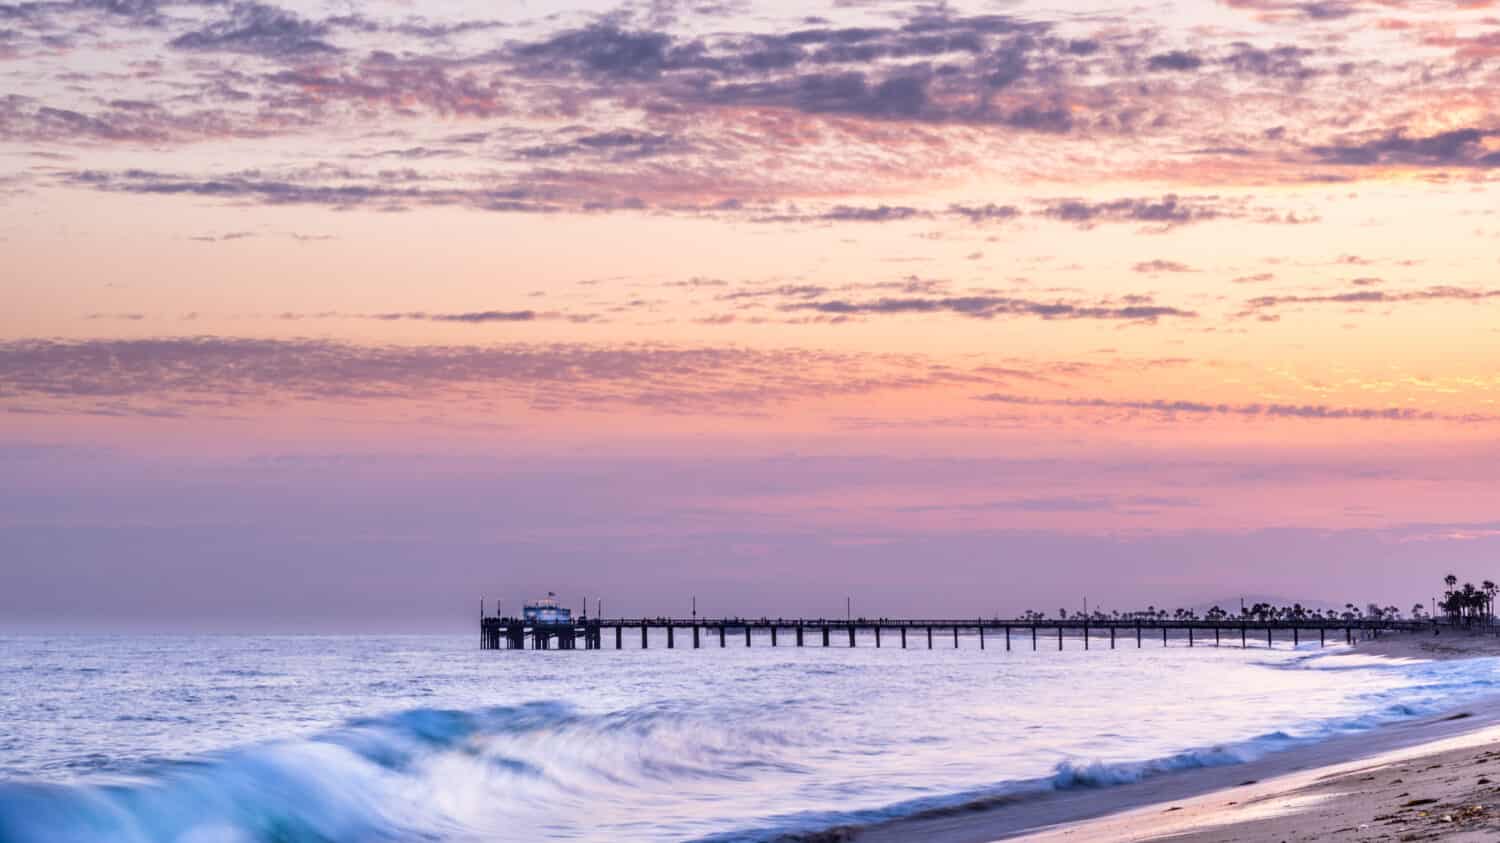 Balboa Pier and Newport Beach in California, home to some of the largest waves in the United States.